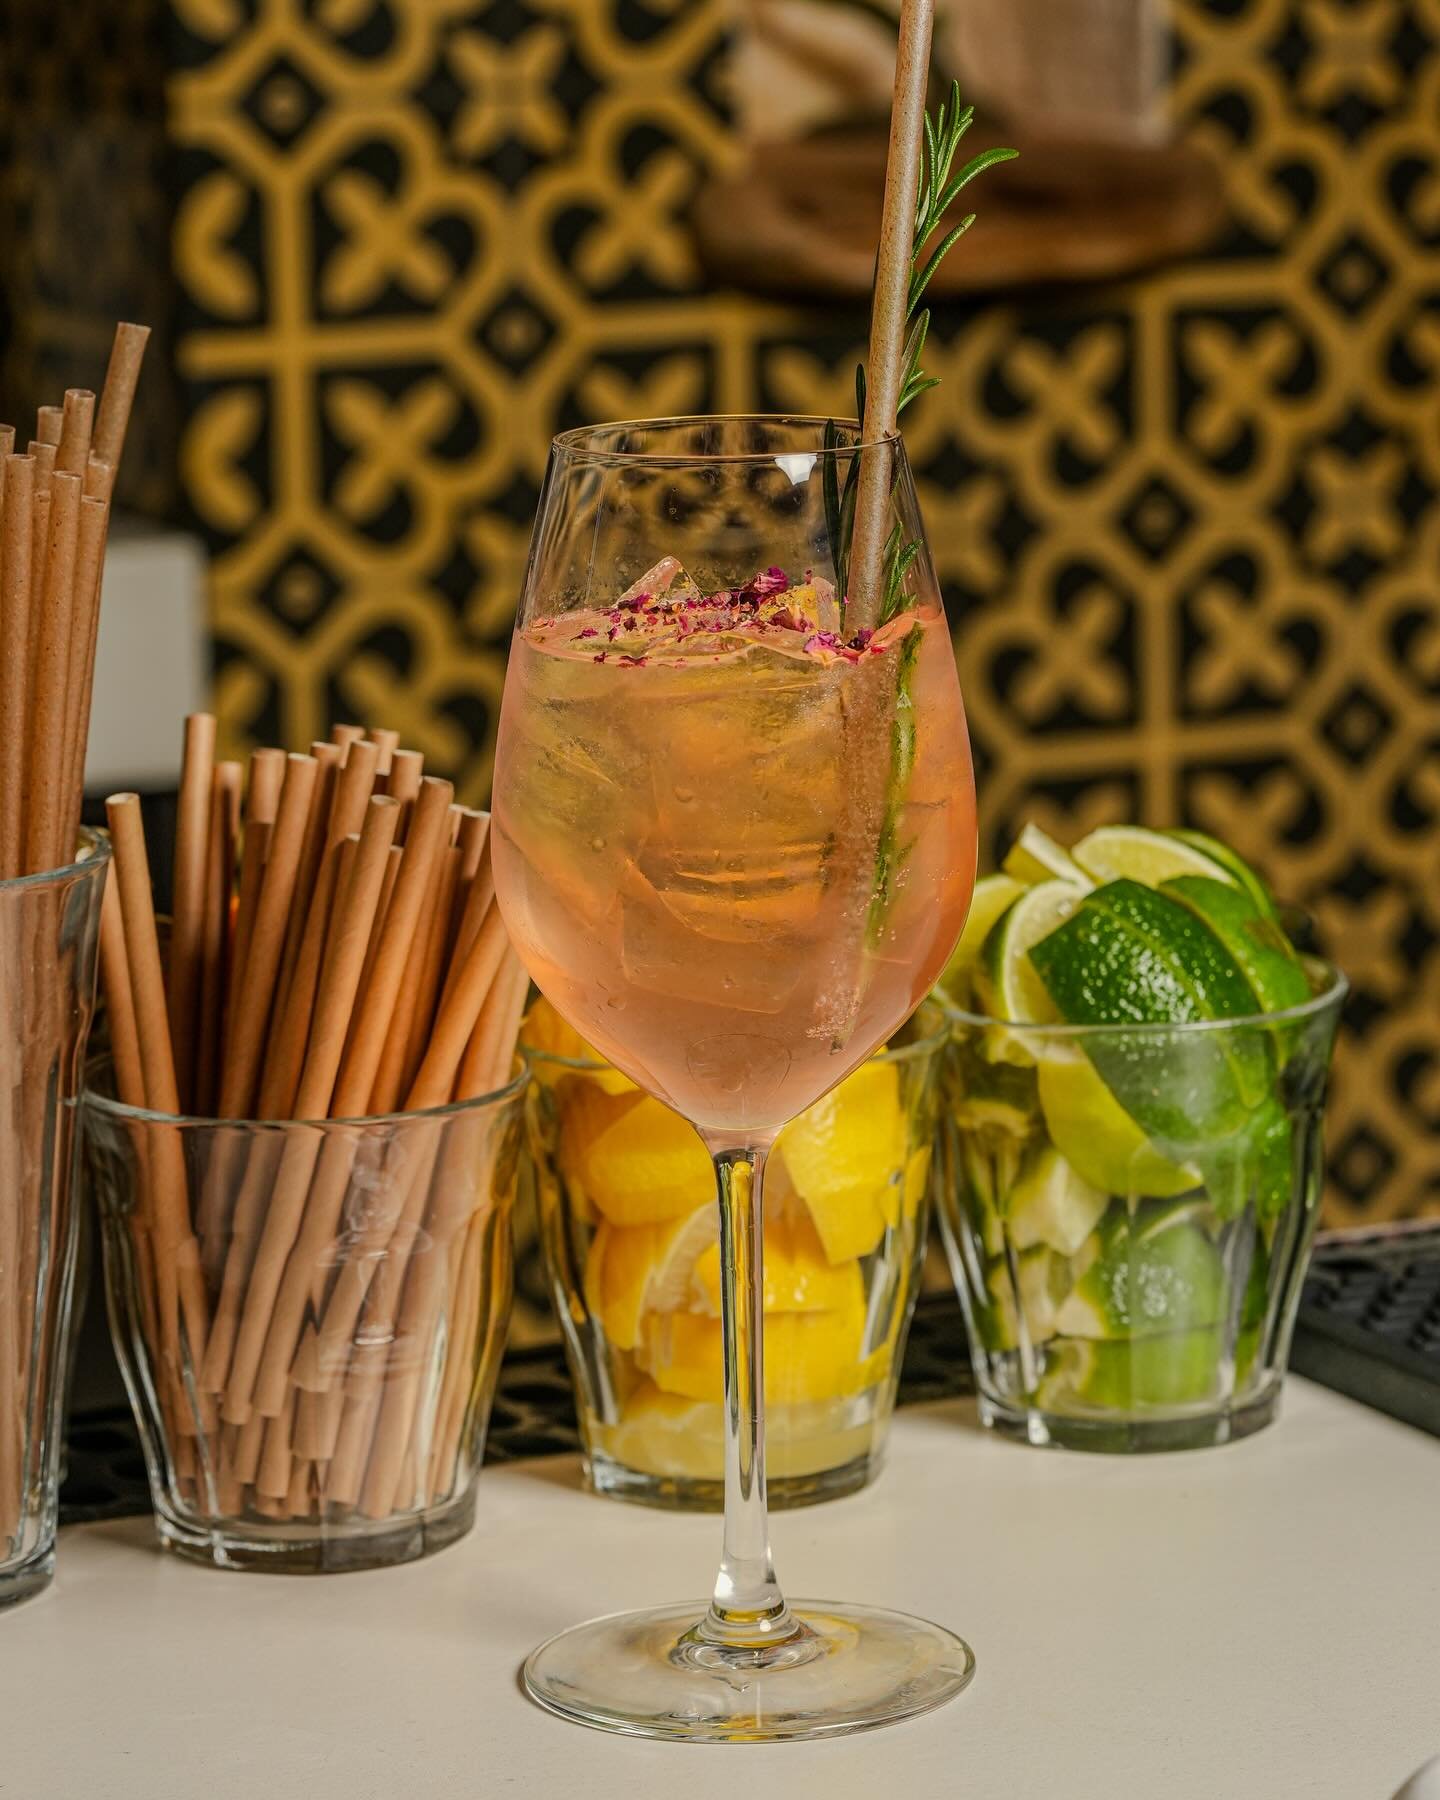 Come enjoy weekend brunch inside or in our garden and start with our brunch Spritz with gin, contratto bitter, rose water, lemon, and brut.